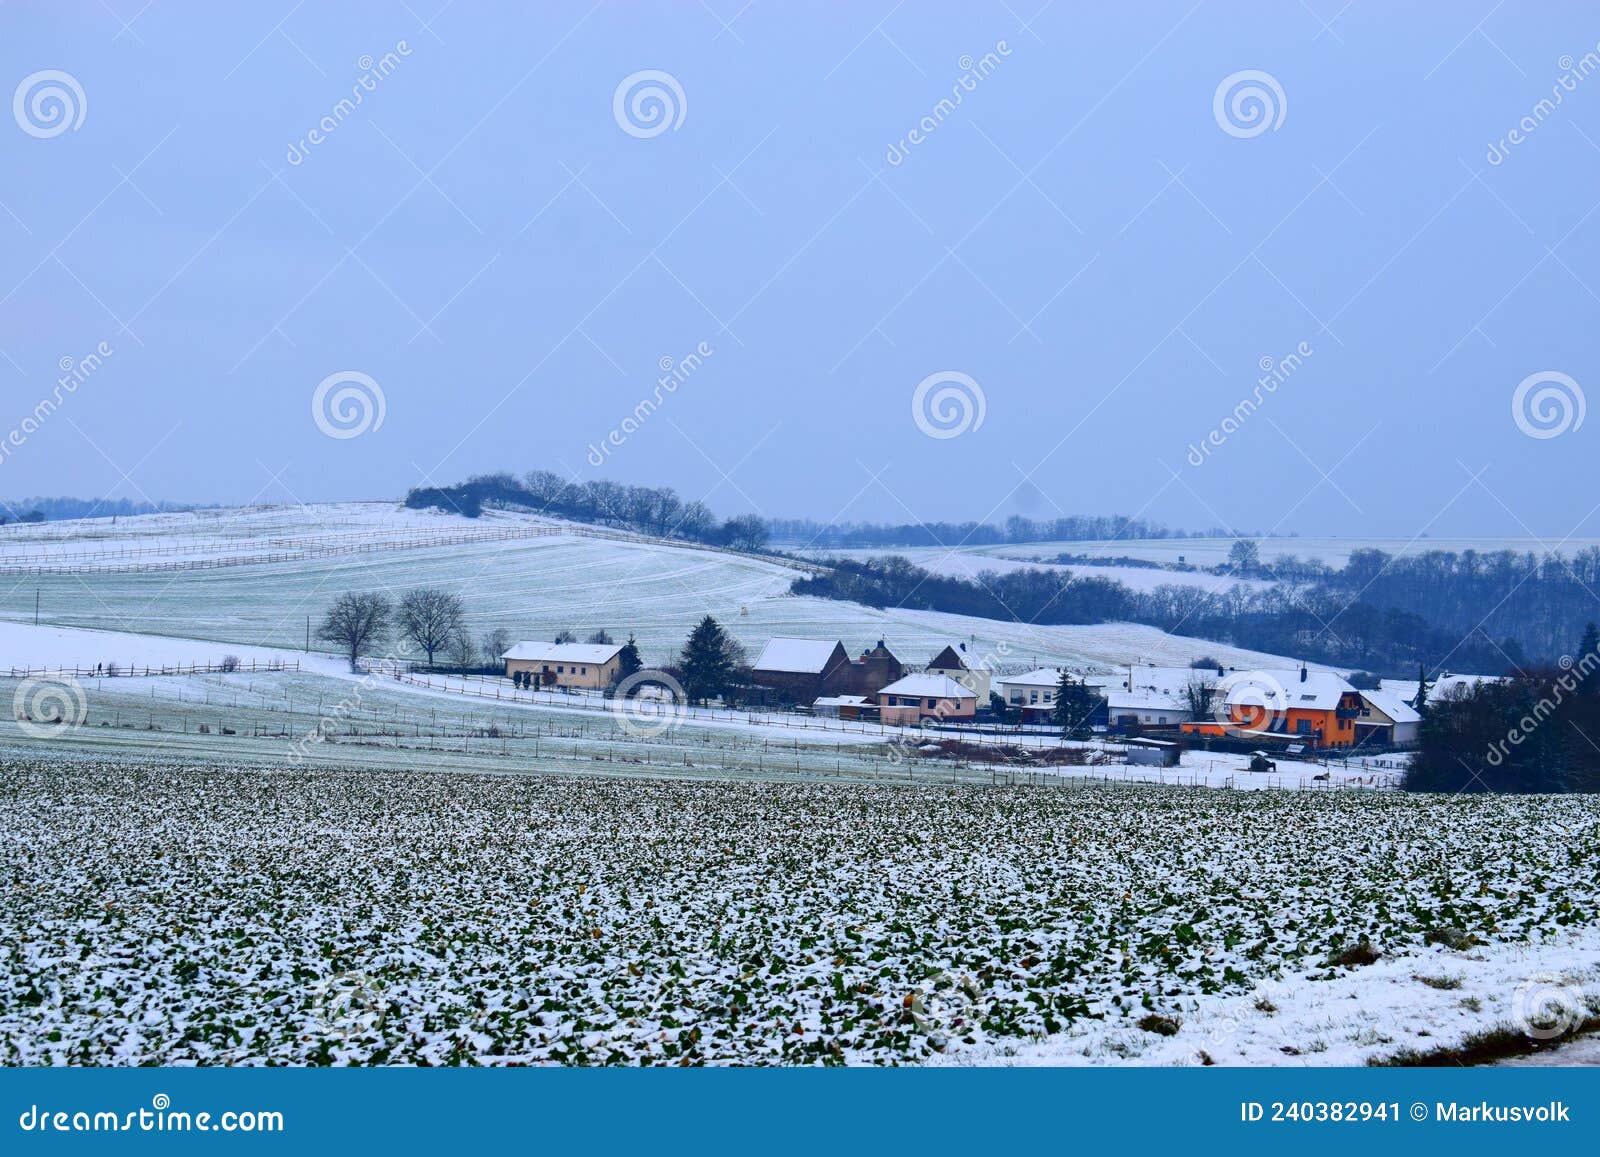 outer part of village welling with snowy landscape in the eifel